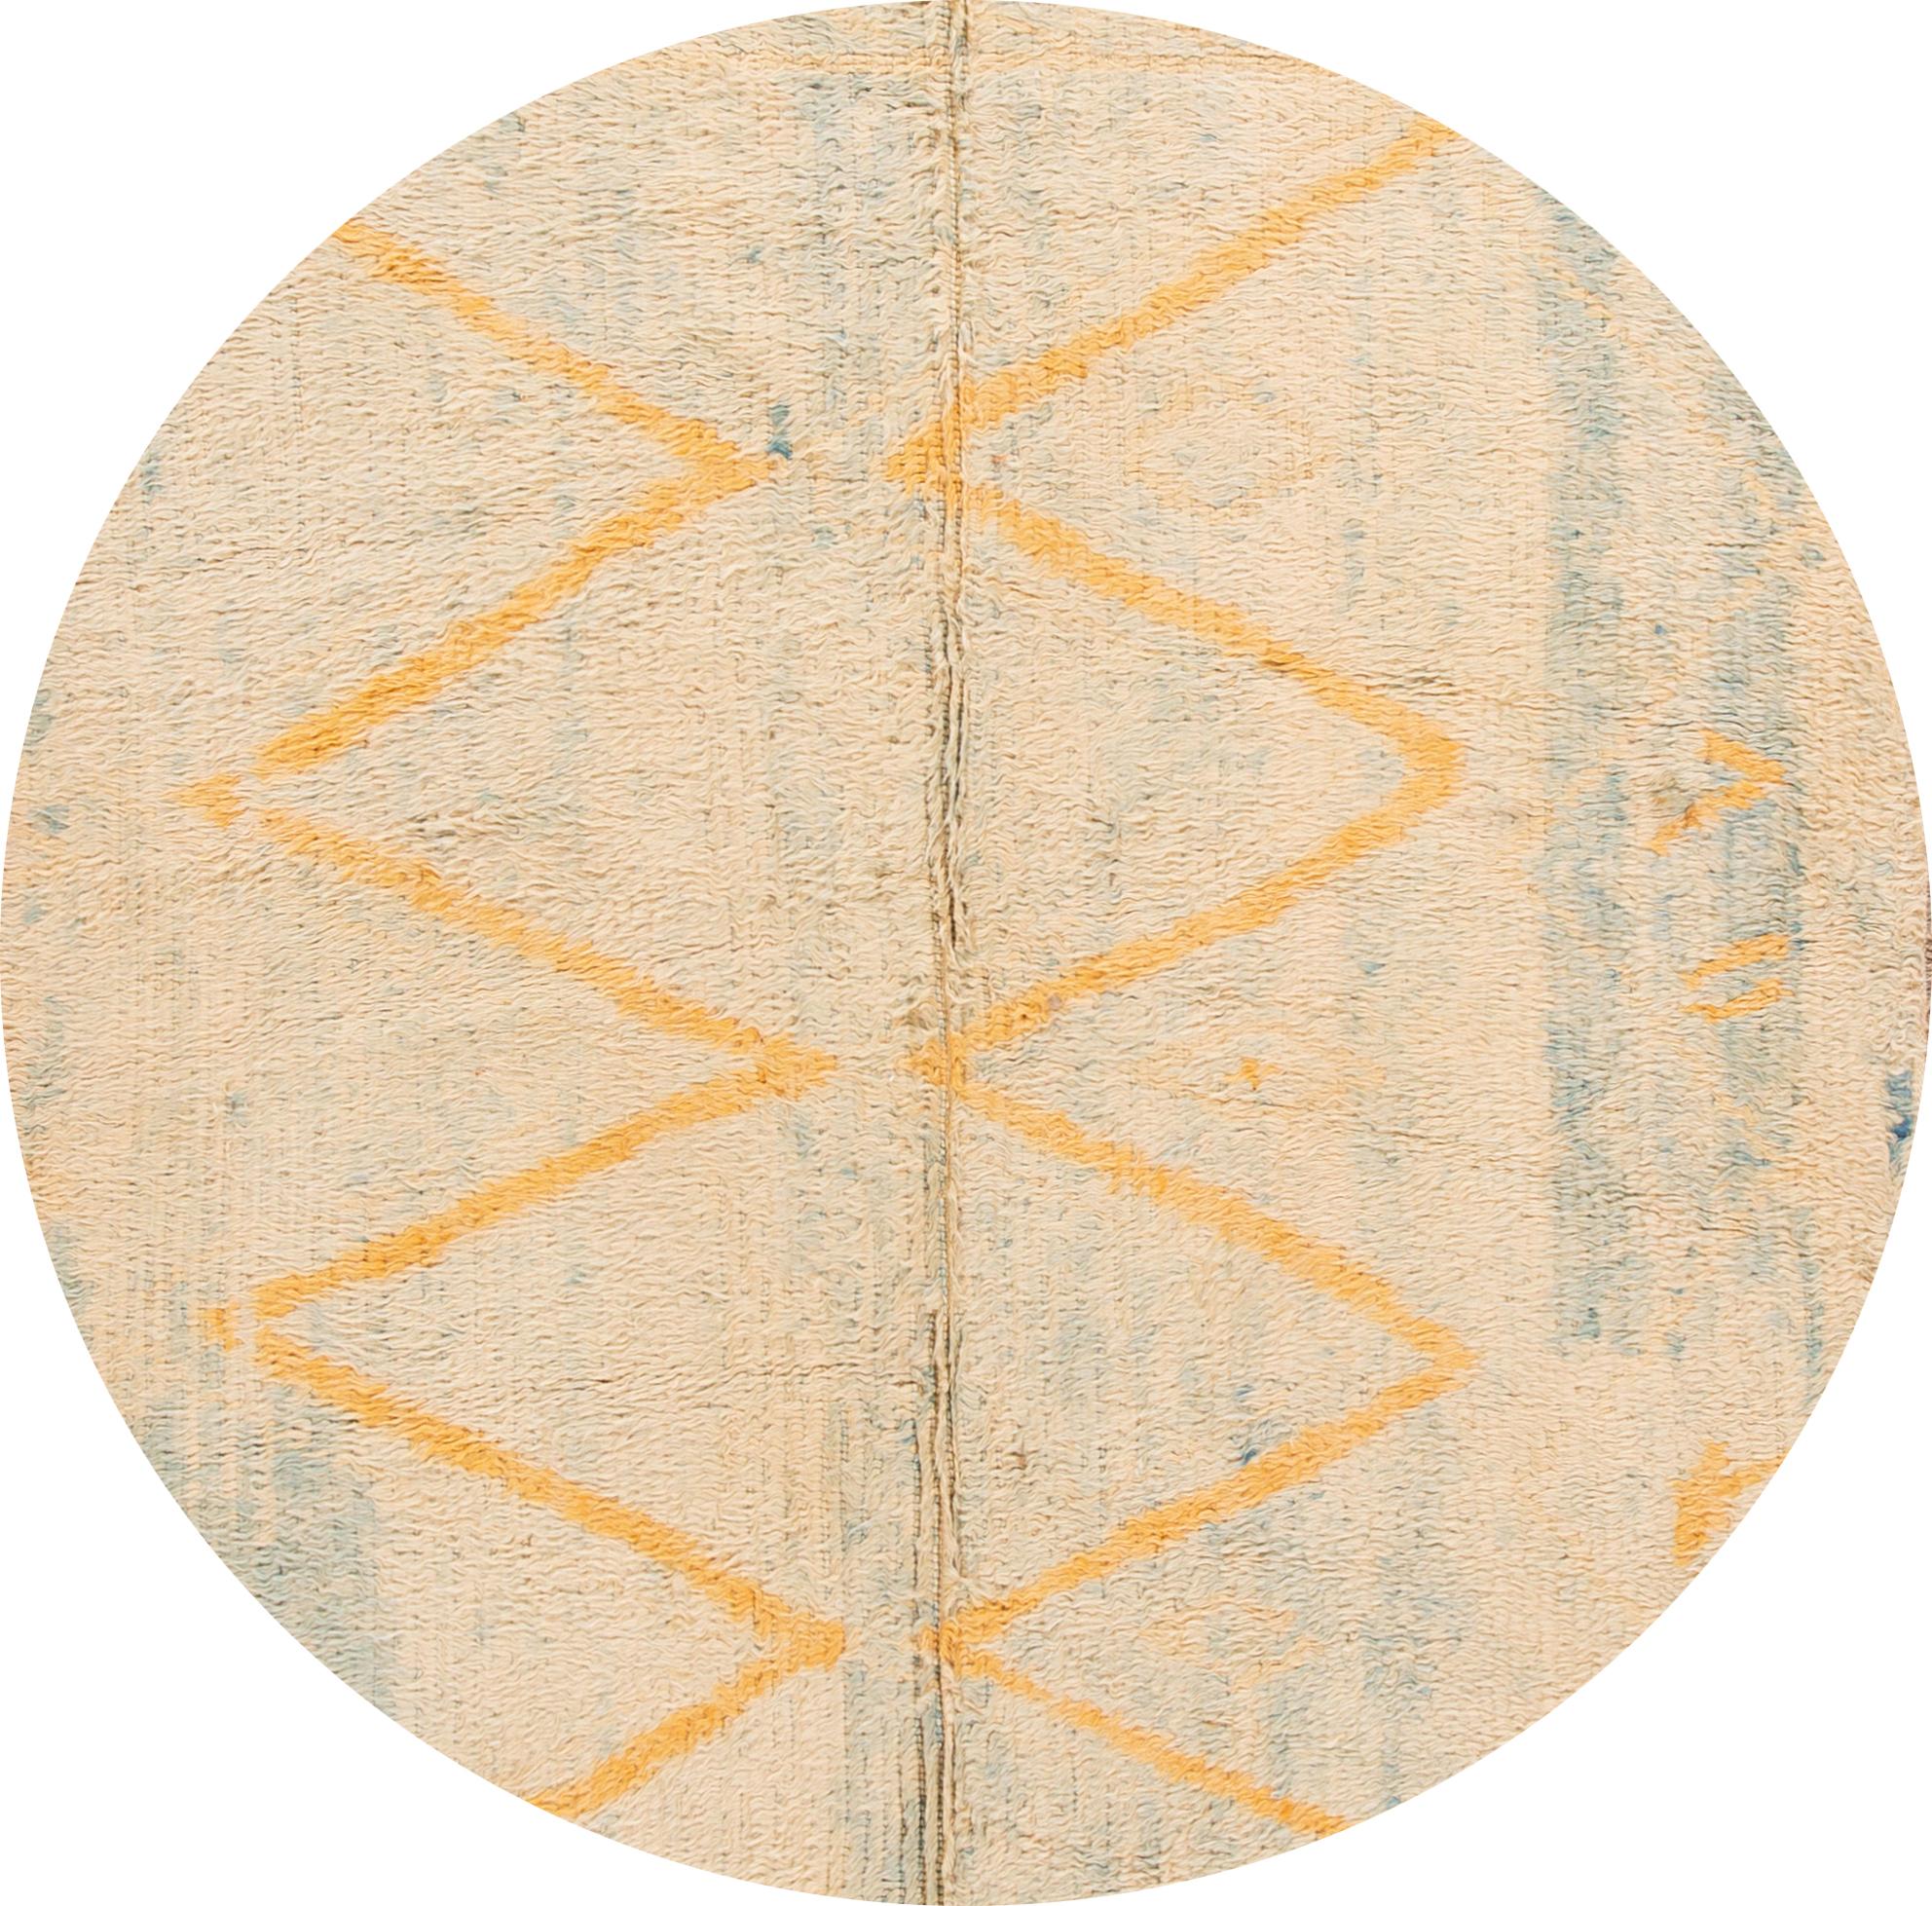 A mid-20th century hand knotted Moroccan rug with a peach field, orange and blue accents in a geometric design. 

This rug measures: 6'4